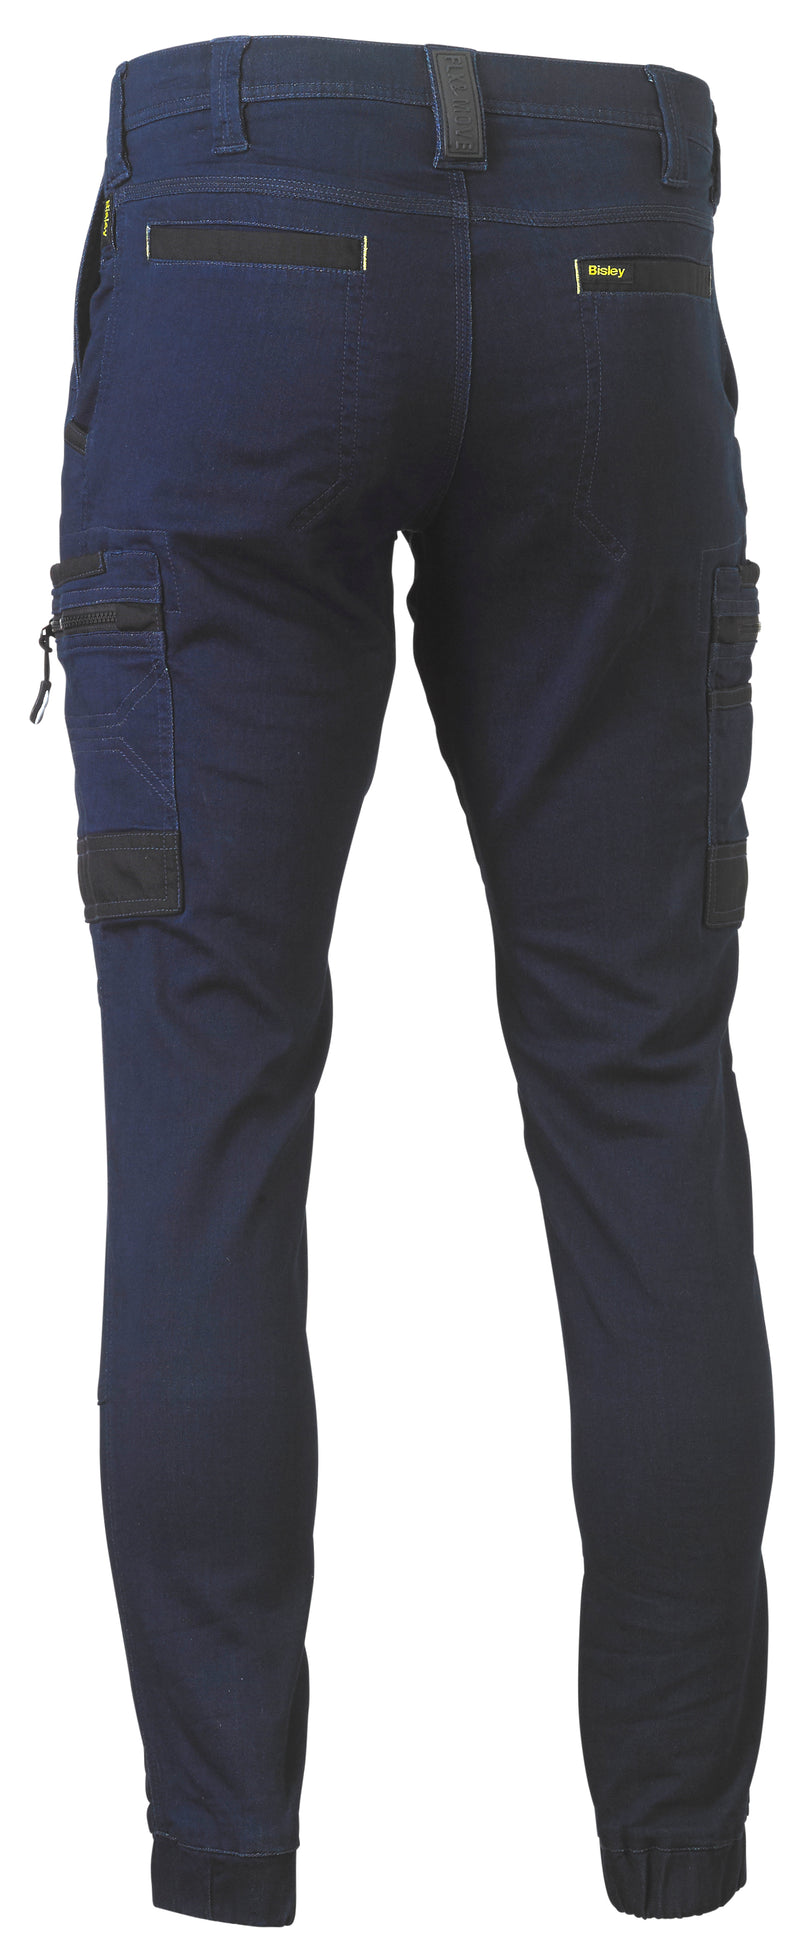 Load image into Gallery viewer, Wholesale BPC6334 Bisley Flex And Move™ Stretch Cargo Cuffed Pants - Stout Printed or Blank
